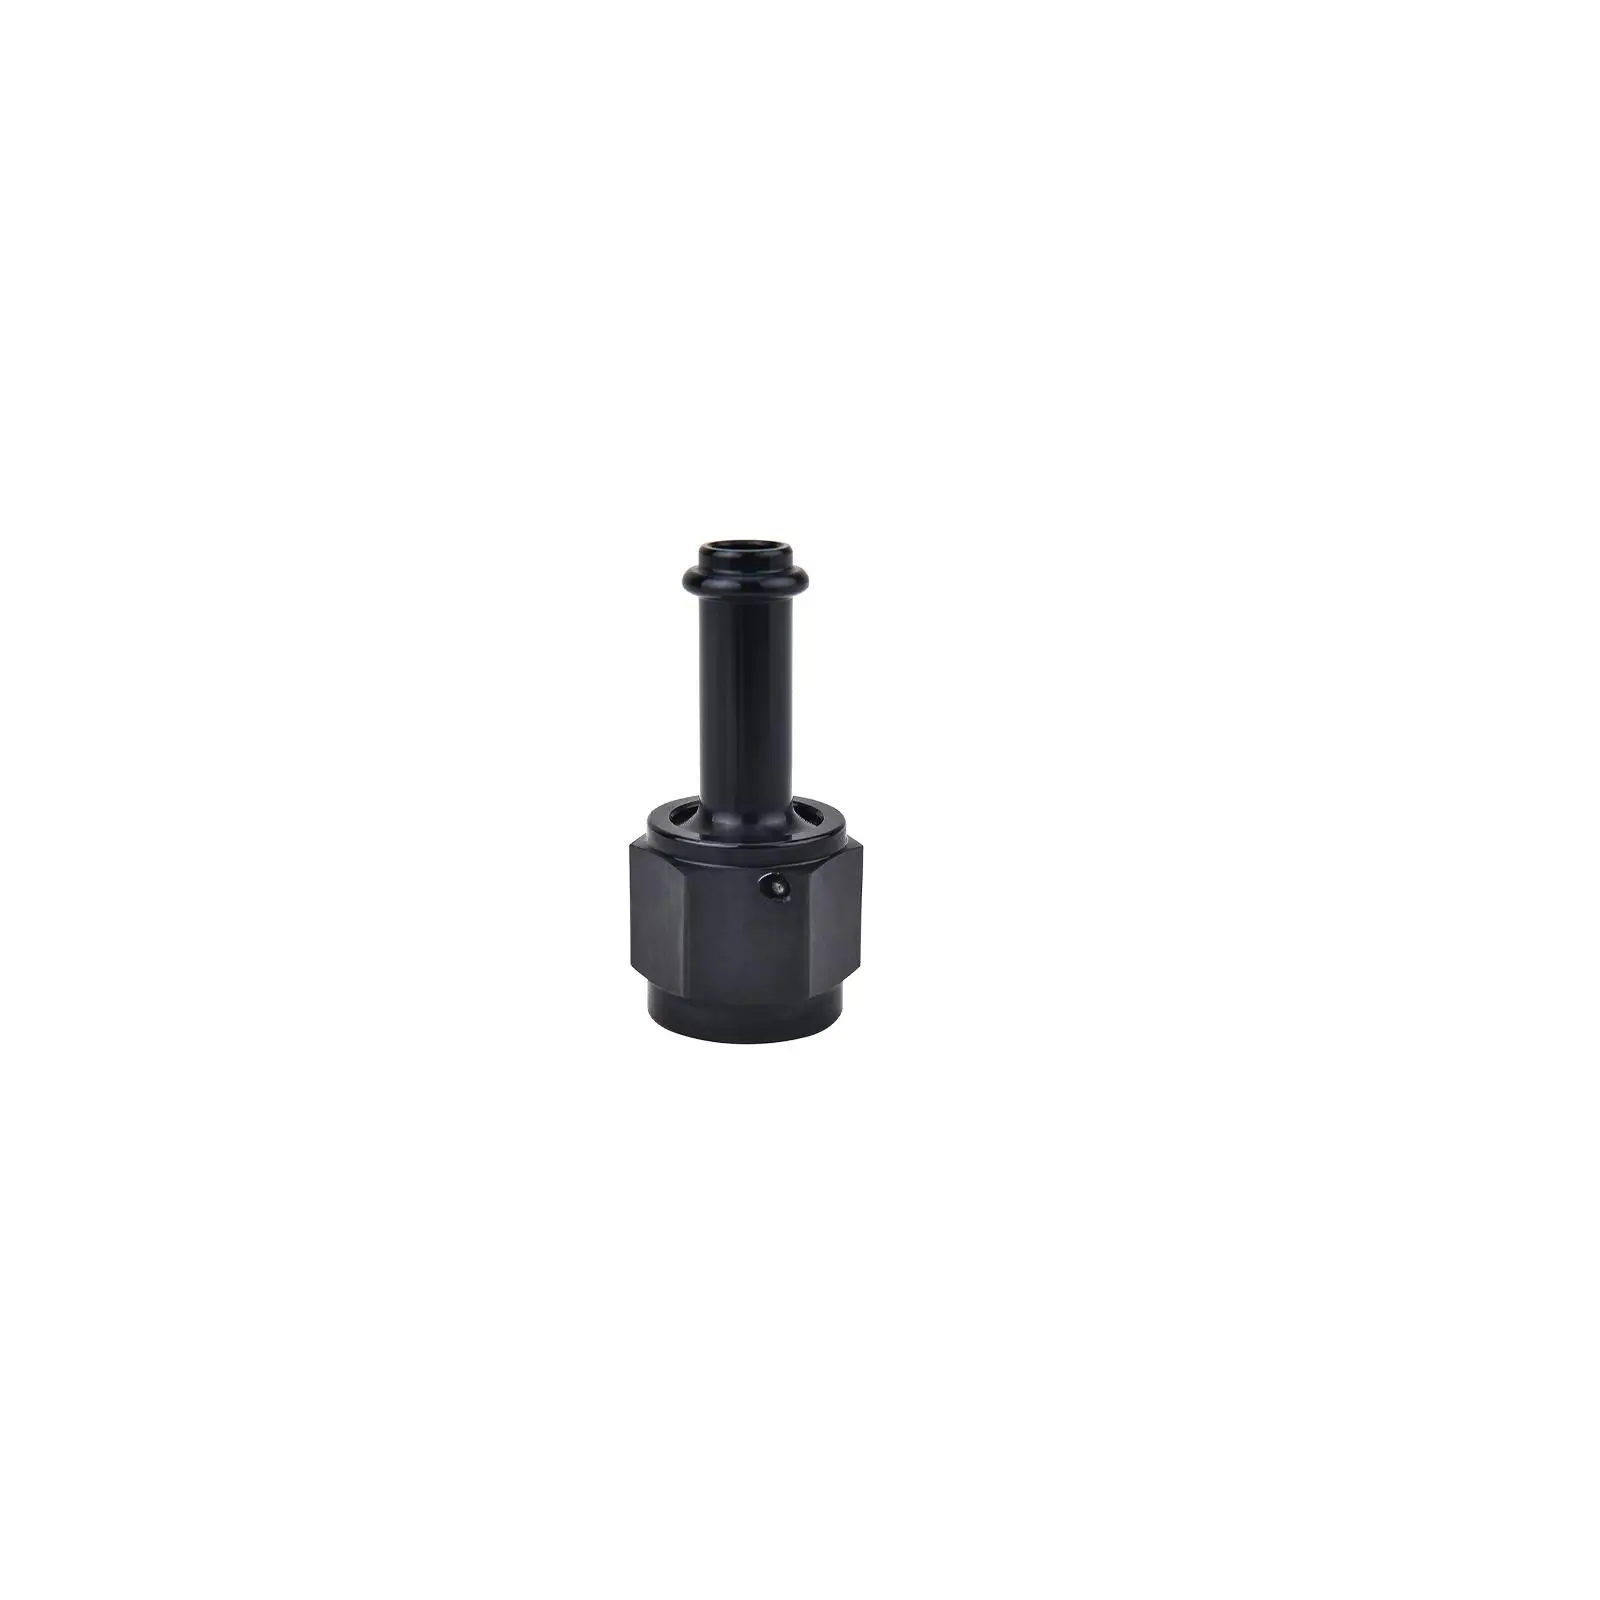 6AN Female Barb Fitting Adapter Black High Performance Component Straight